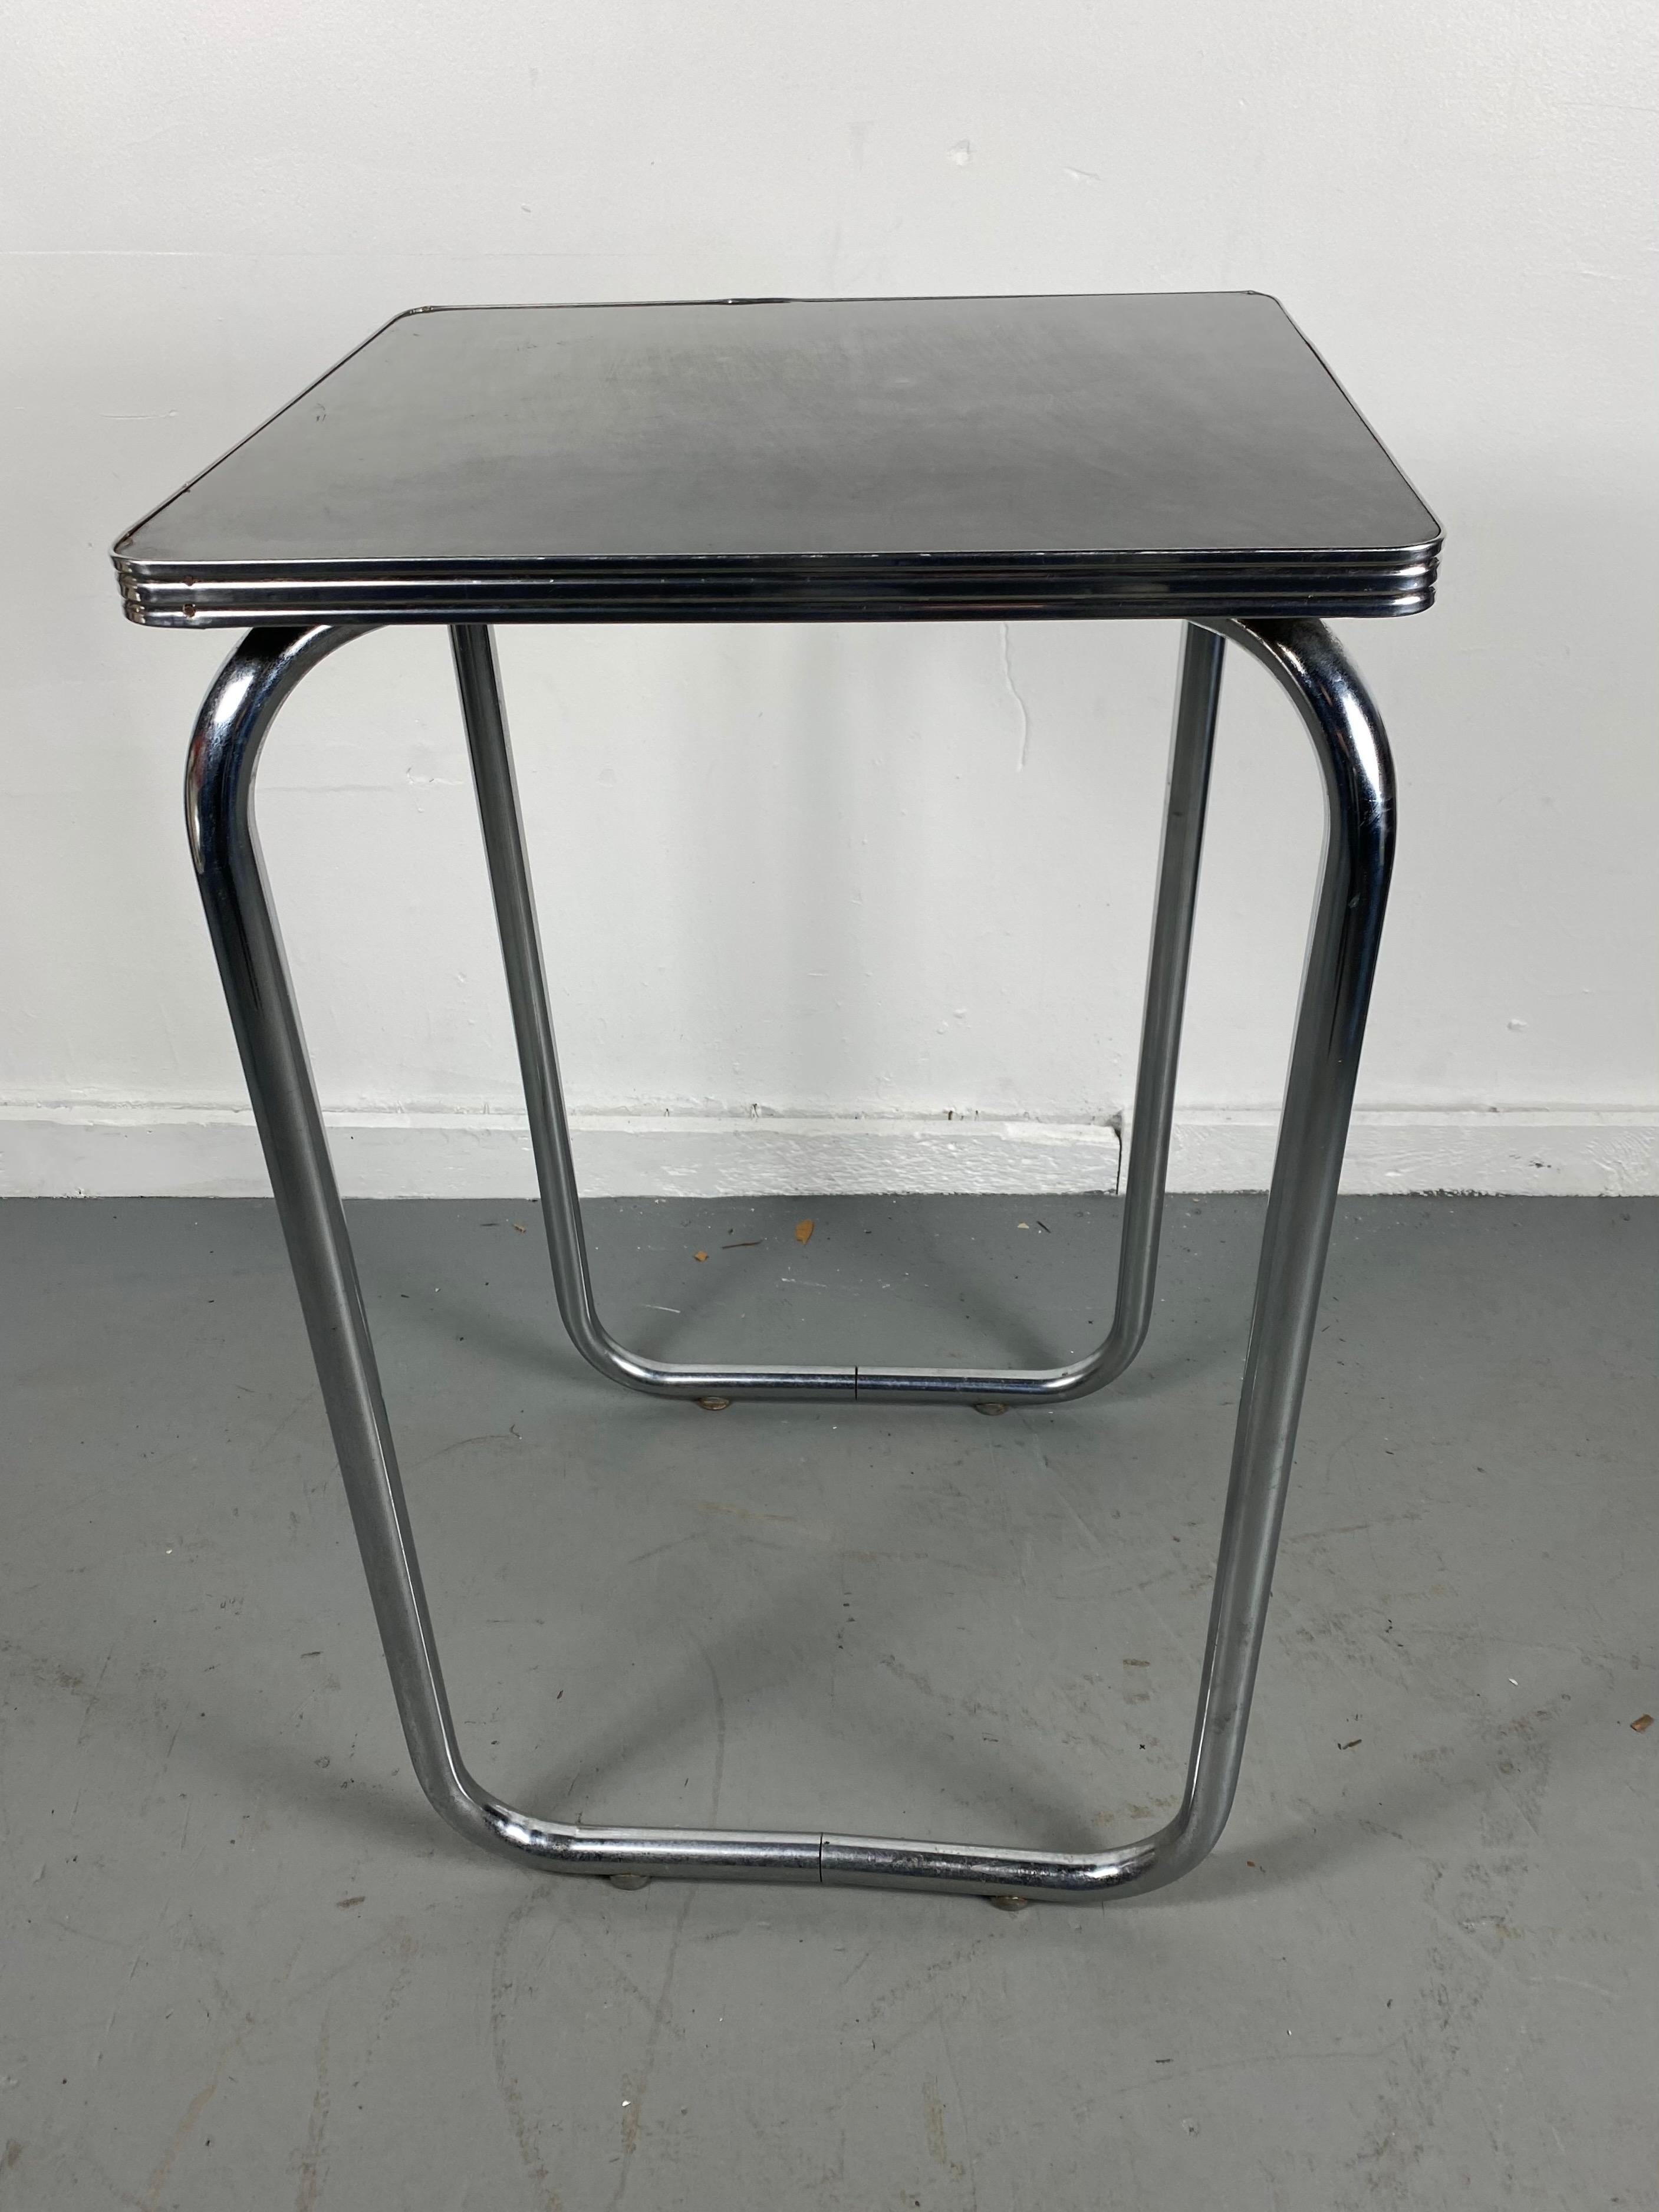 Unusual Bauhaus Style Black and Tubular Chrome Table / Stand / Wolfgang Hoffmann For Sale 2